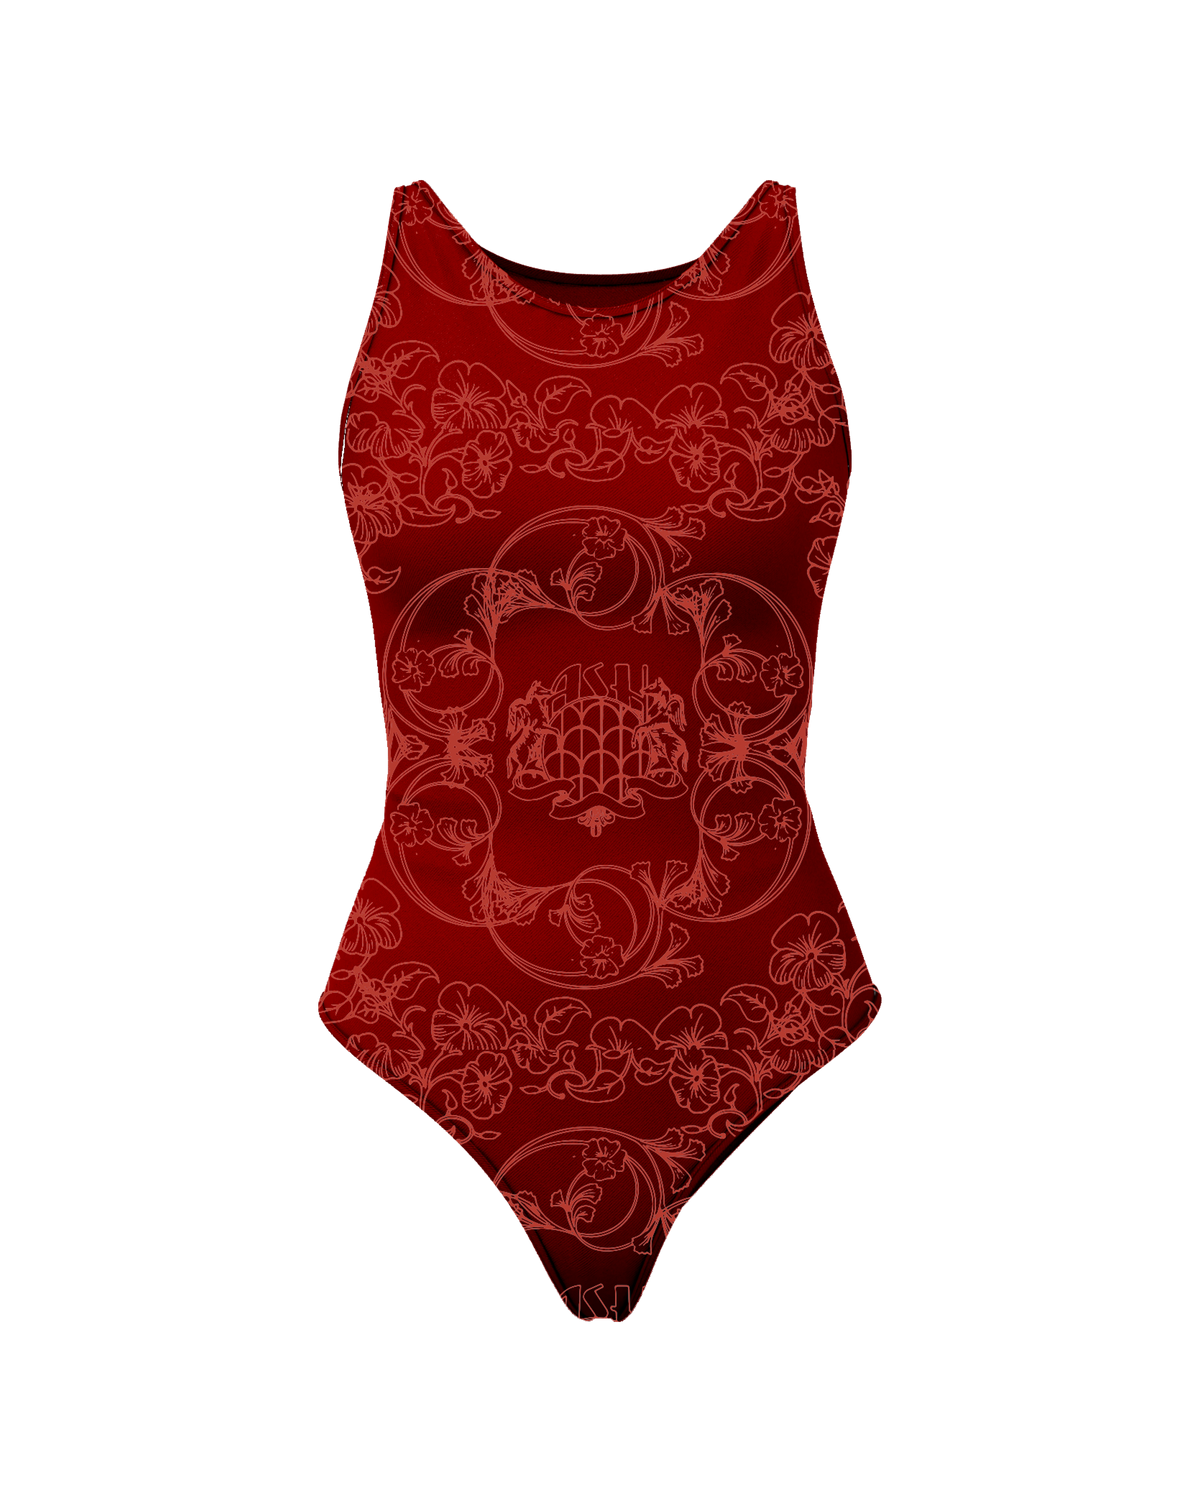 Ashluxe Female Patterned Swimsuit - Red